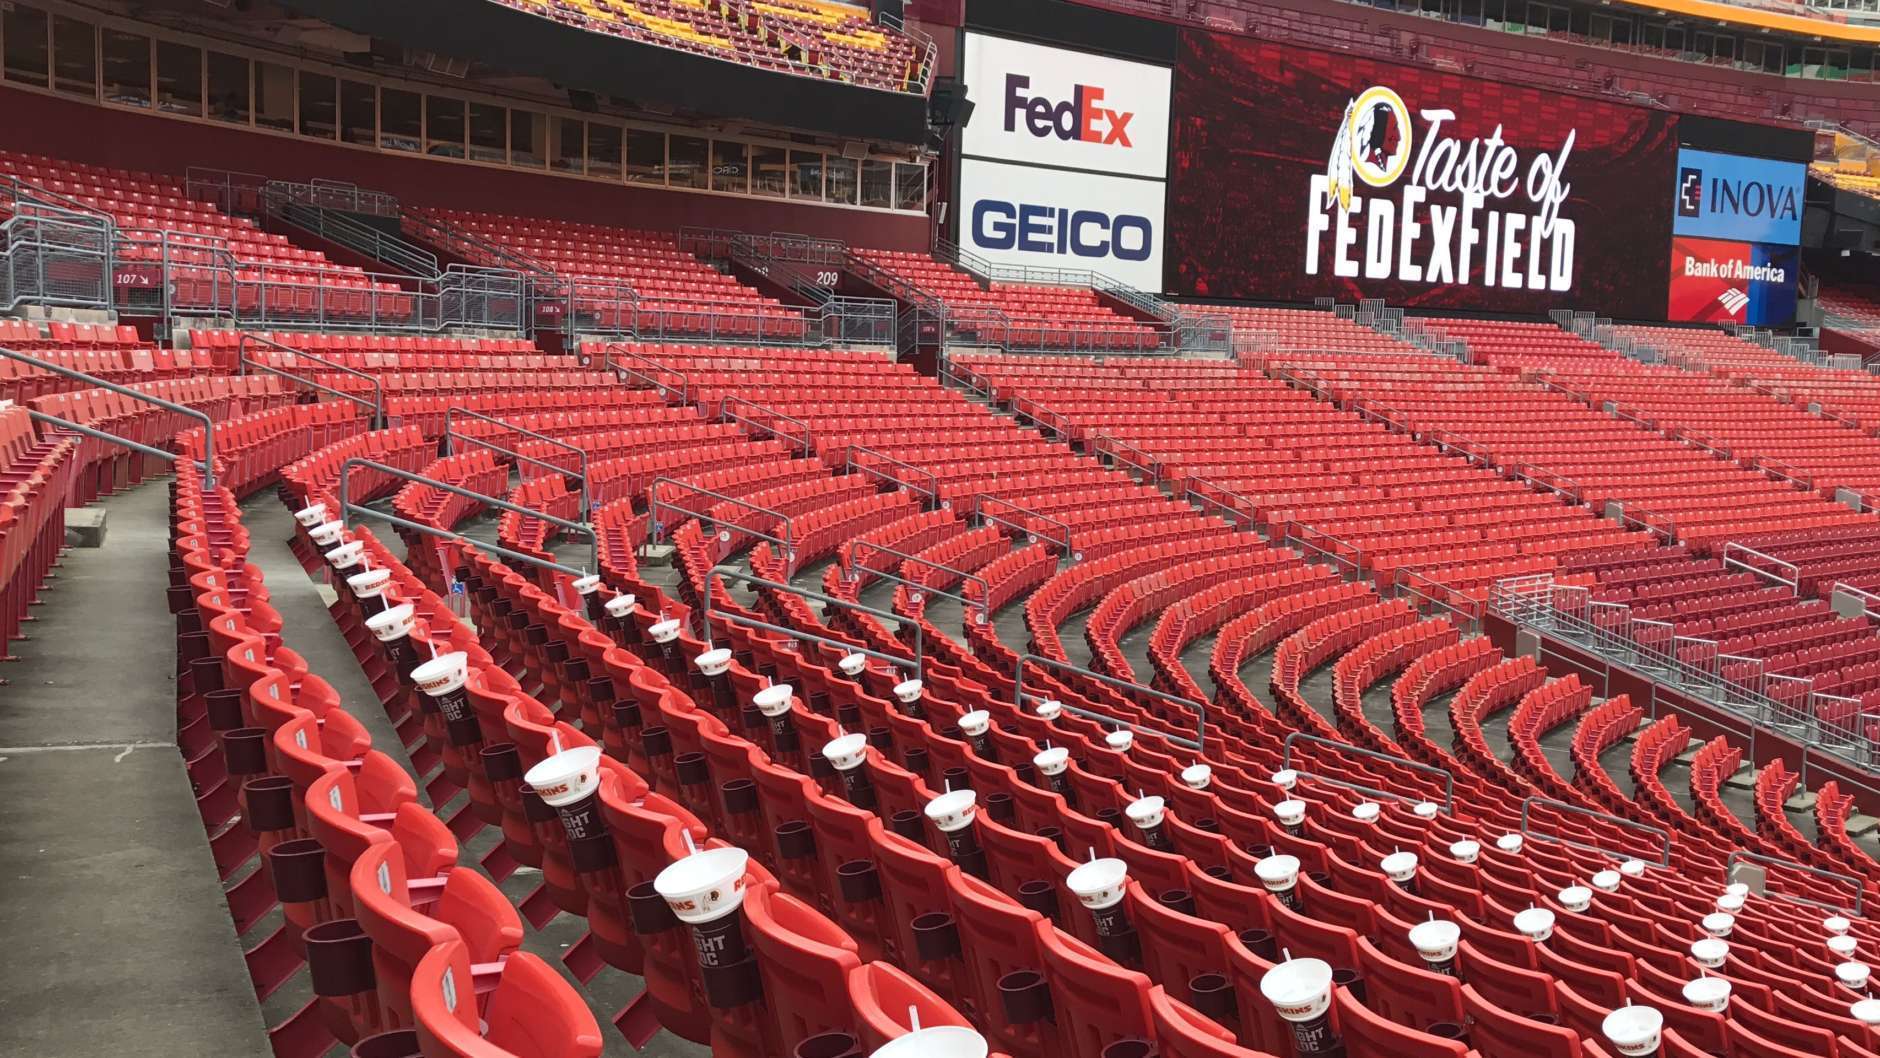 For the first time in more than 50 years, it appears not all tickets will be sold at FedEx Field for a Washington Redskins home game. (WTOP/Ginger Whitaker)